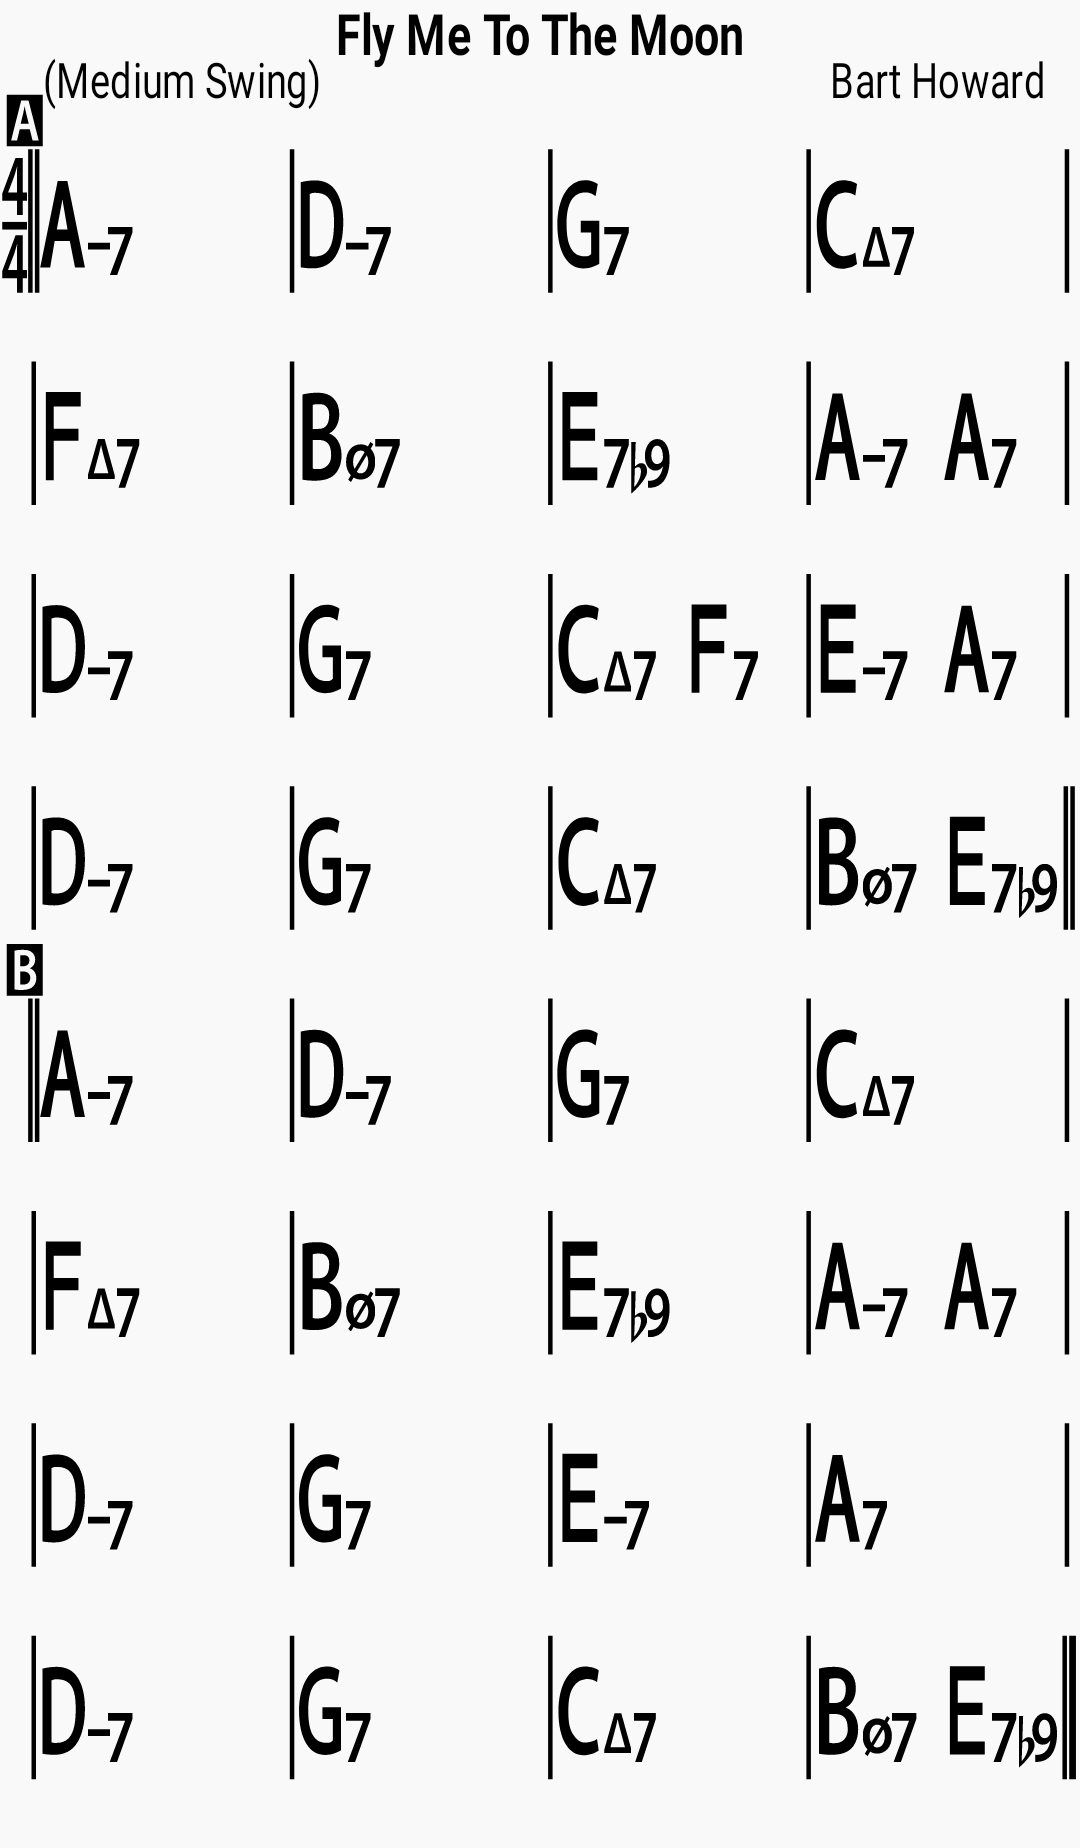 Chord chart for the jazz standard Fly Me To The Moon